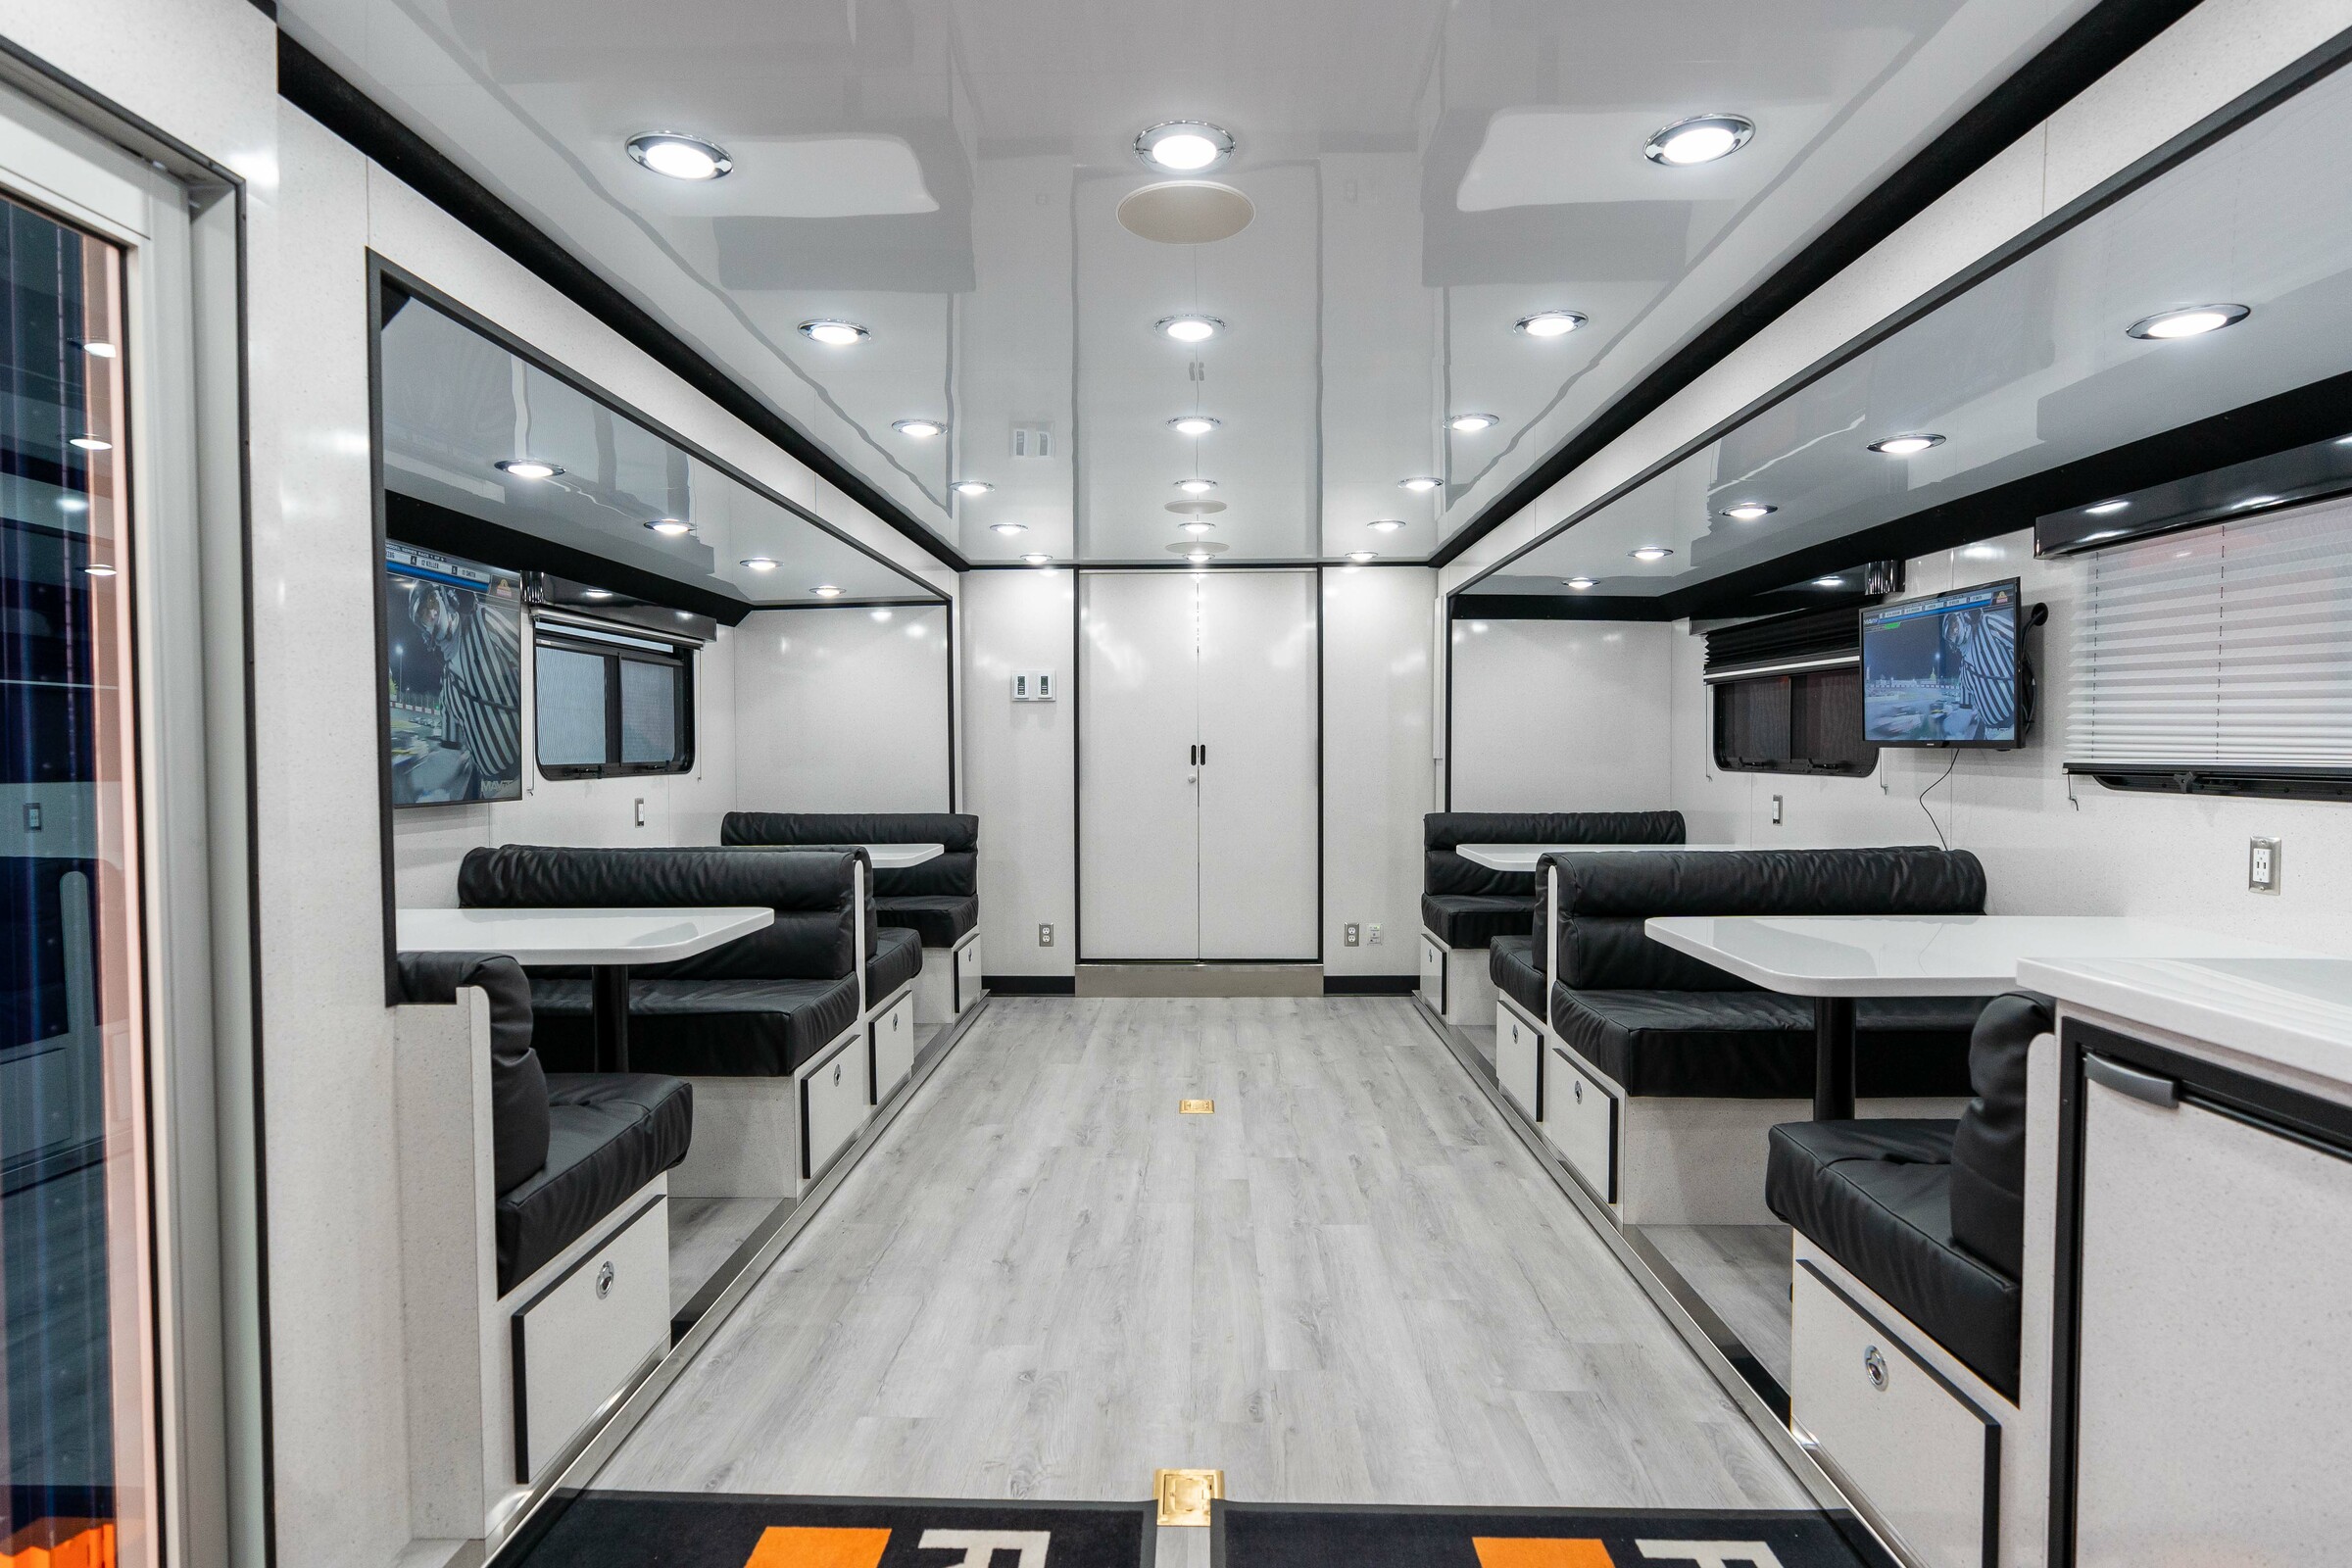 Red Bull KTM Showcases New Hospitality Truck, First-of-its-Kind in SX/MX Paddock